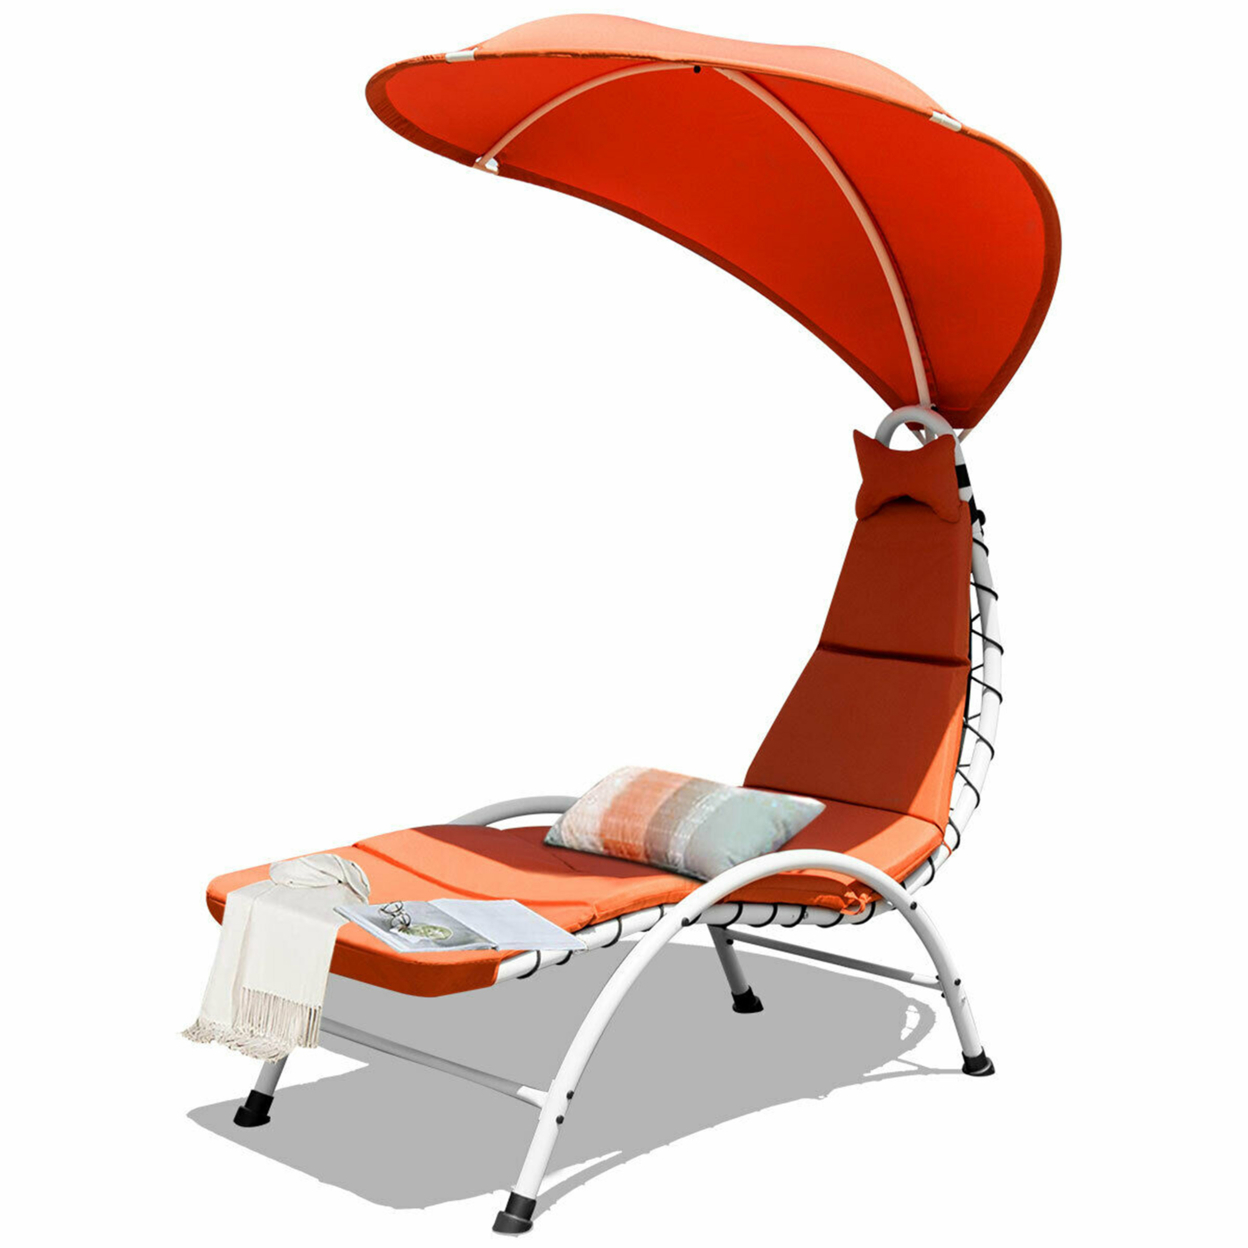 Patio Lounge Chair Chaise Outdoor W/ Steel Frame Cushion Canopy Orange